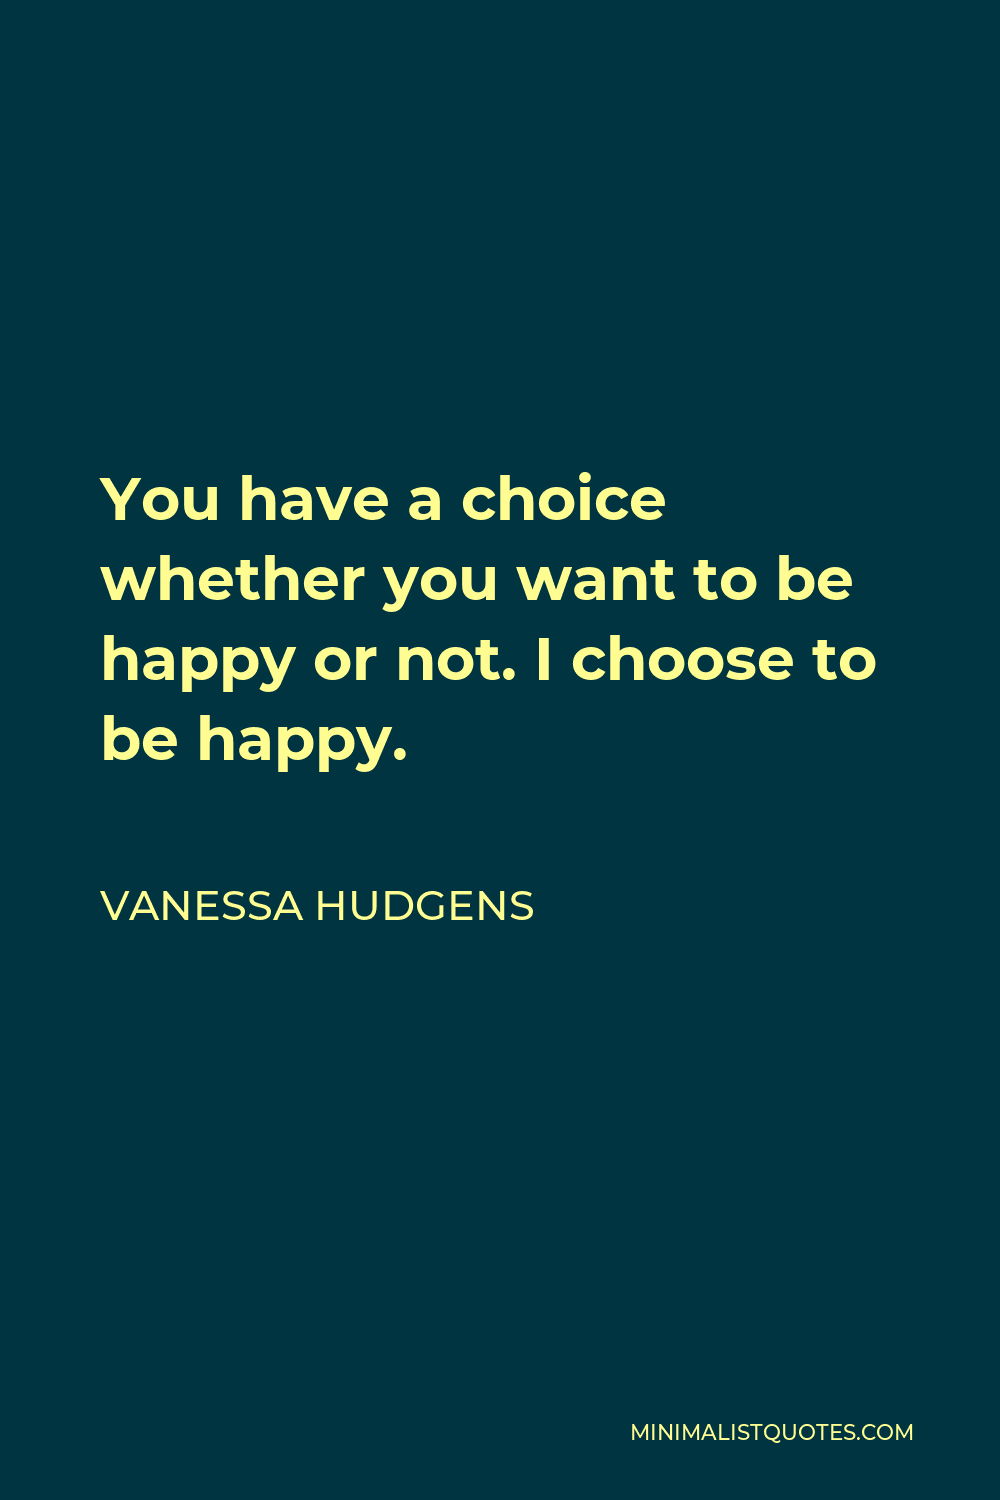 Vanessa Hudgens Quote - You have a choice whether you want to be happy or not. I choose to be happy.